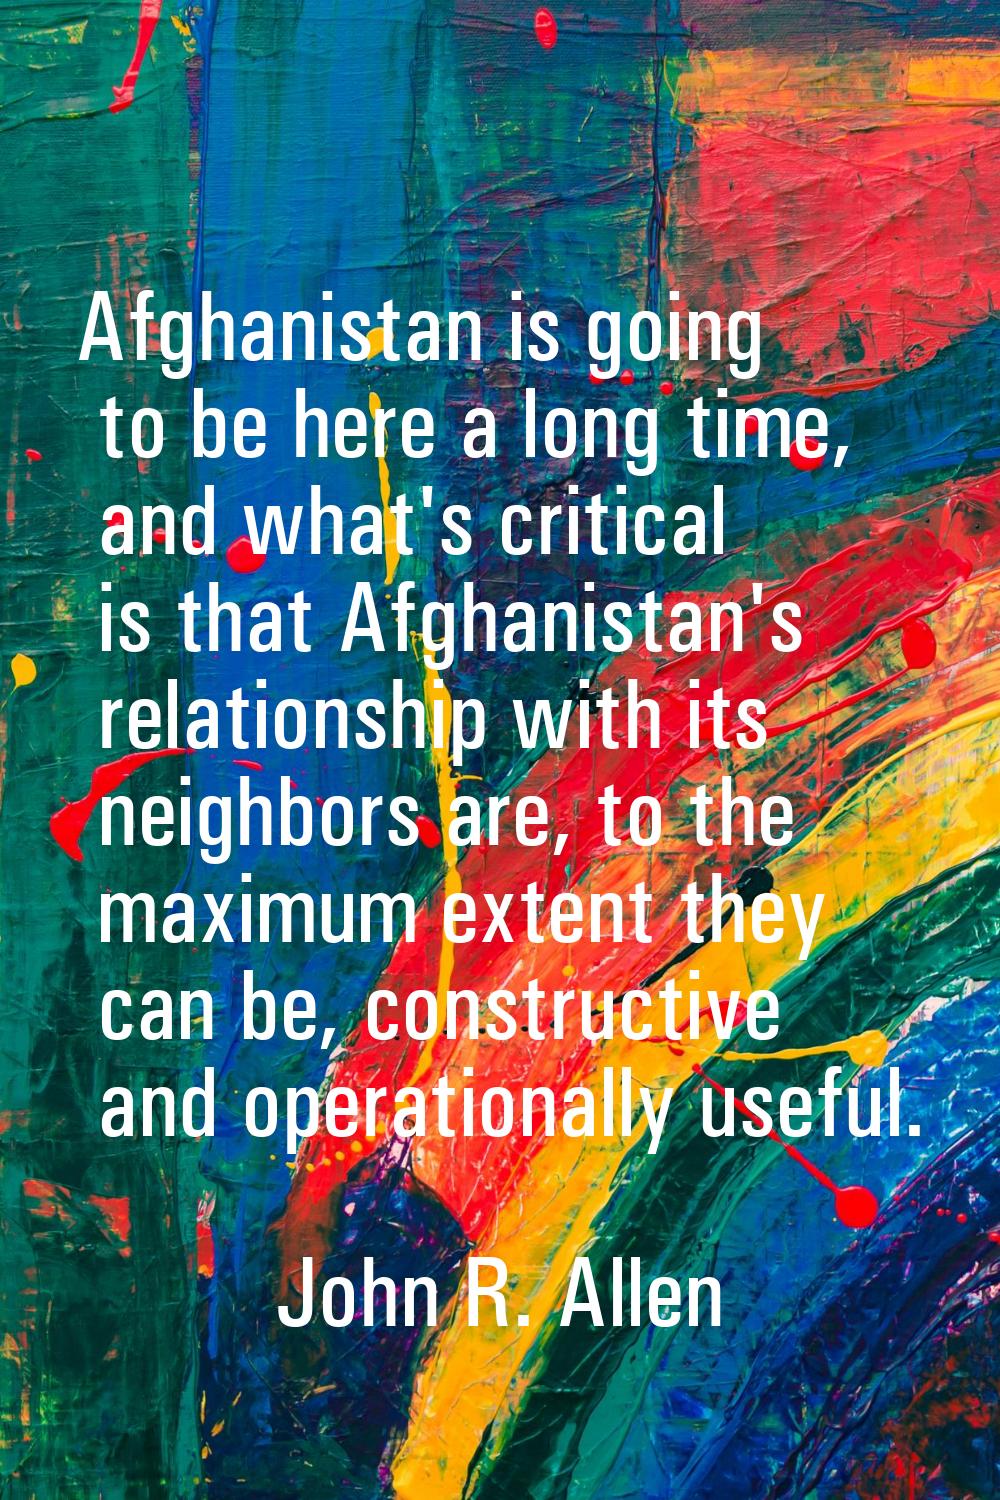 Afghanistan is going to be here a long time, and what's critical is that Afghanistan's relationship